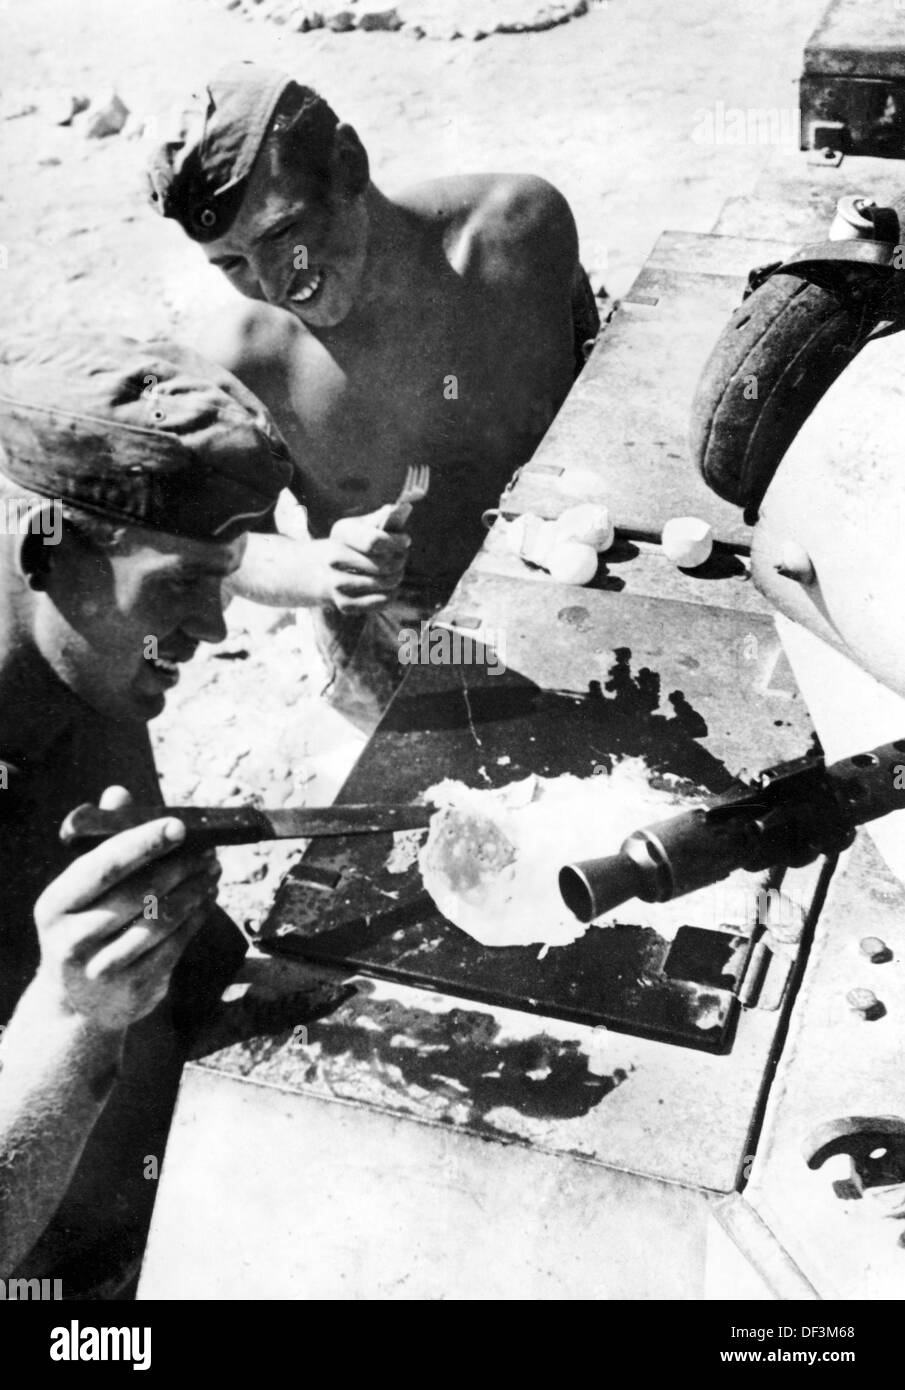 The image from the Nazi Propaganda! depicts soldiers of the German Wehrmacht who fry an egg on the hot metal of a tank, published on 11 October 1941. Place unknown. Fotoarchiv für Zeitgeschichte Stock Photo